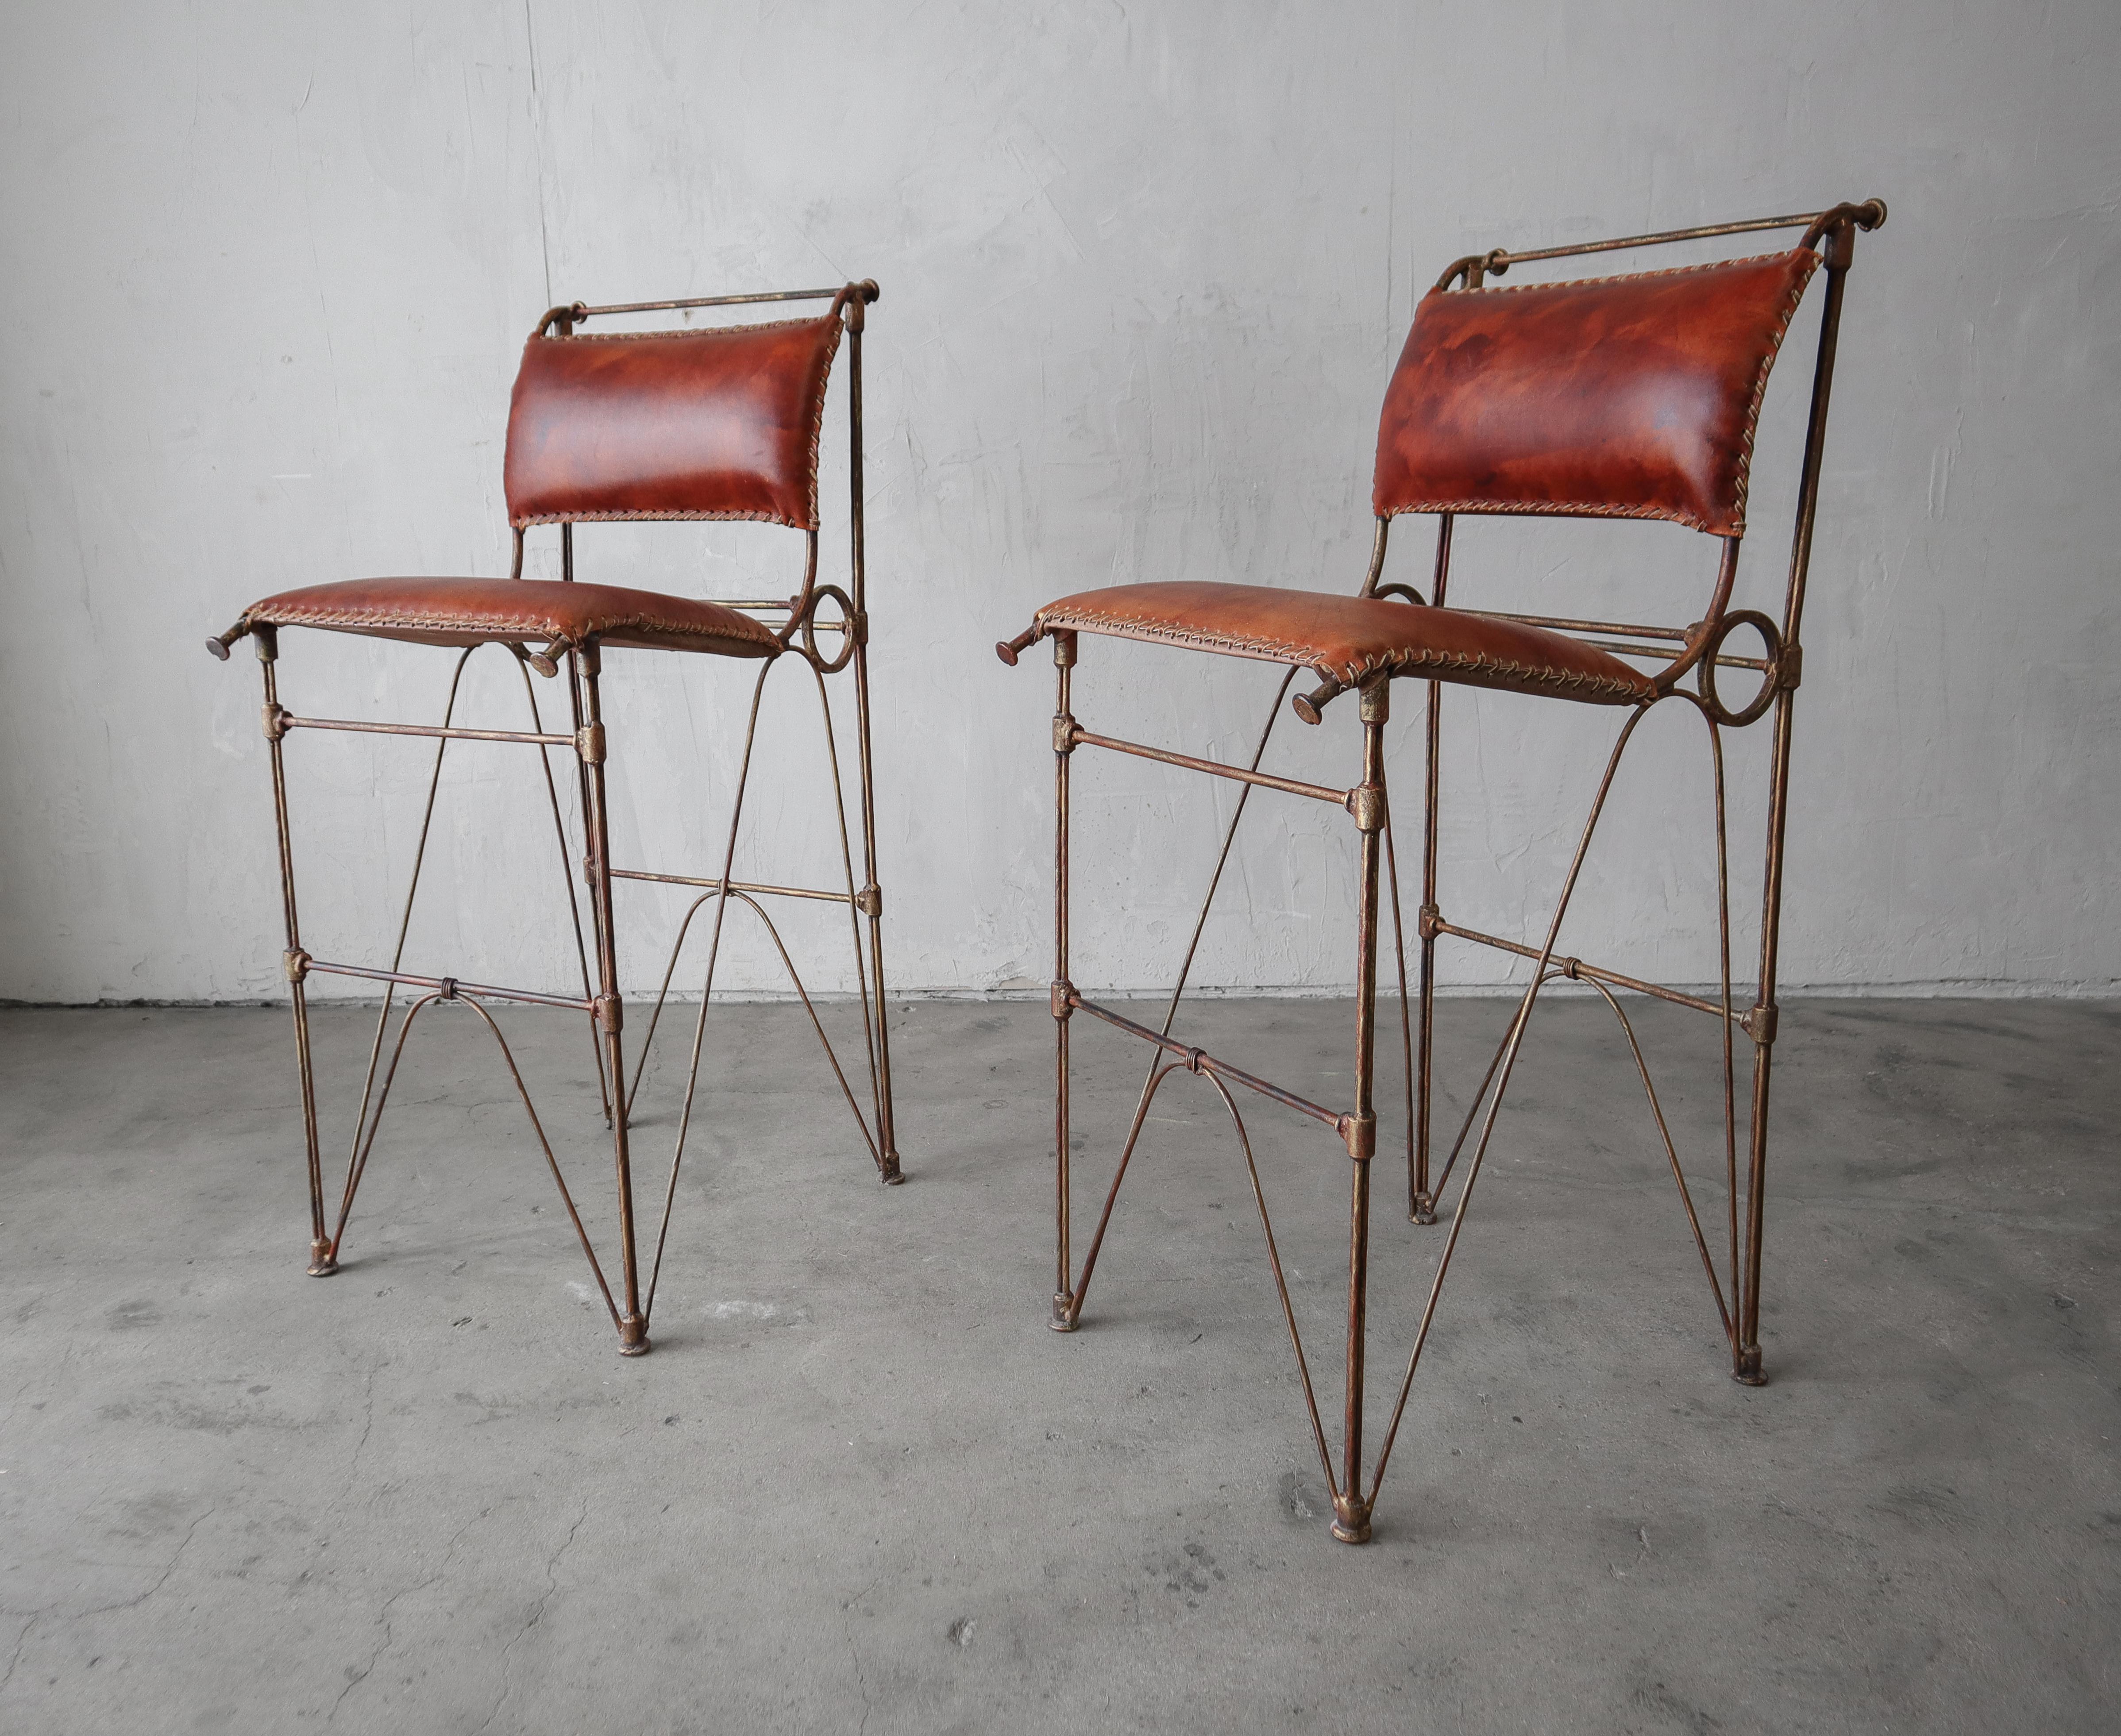 Nice rustic pair of leather bar stools after Ilana Goor.  The hand stitched leather and metal details on these stools make them so unique and beautiful.

Stools are installation ready.  They are in excellent condition with no damage to be noted.